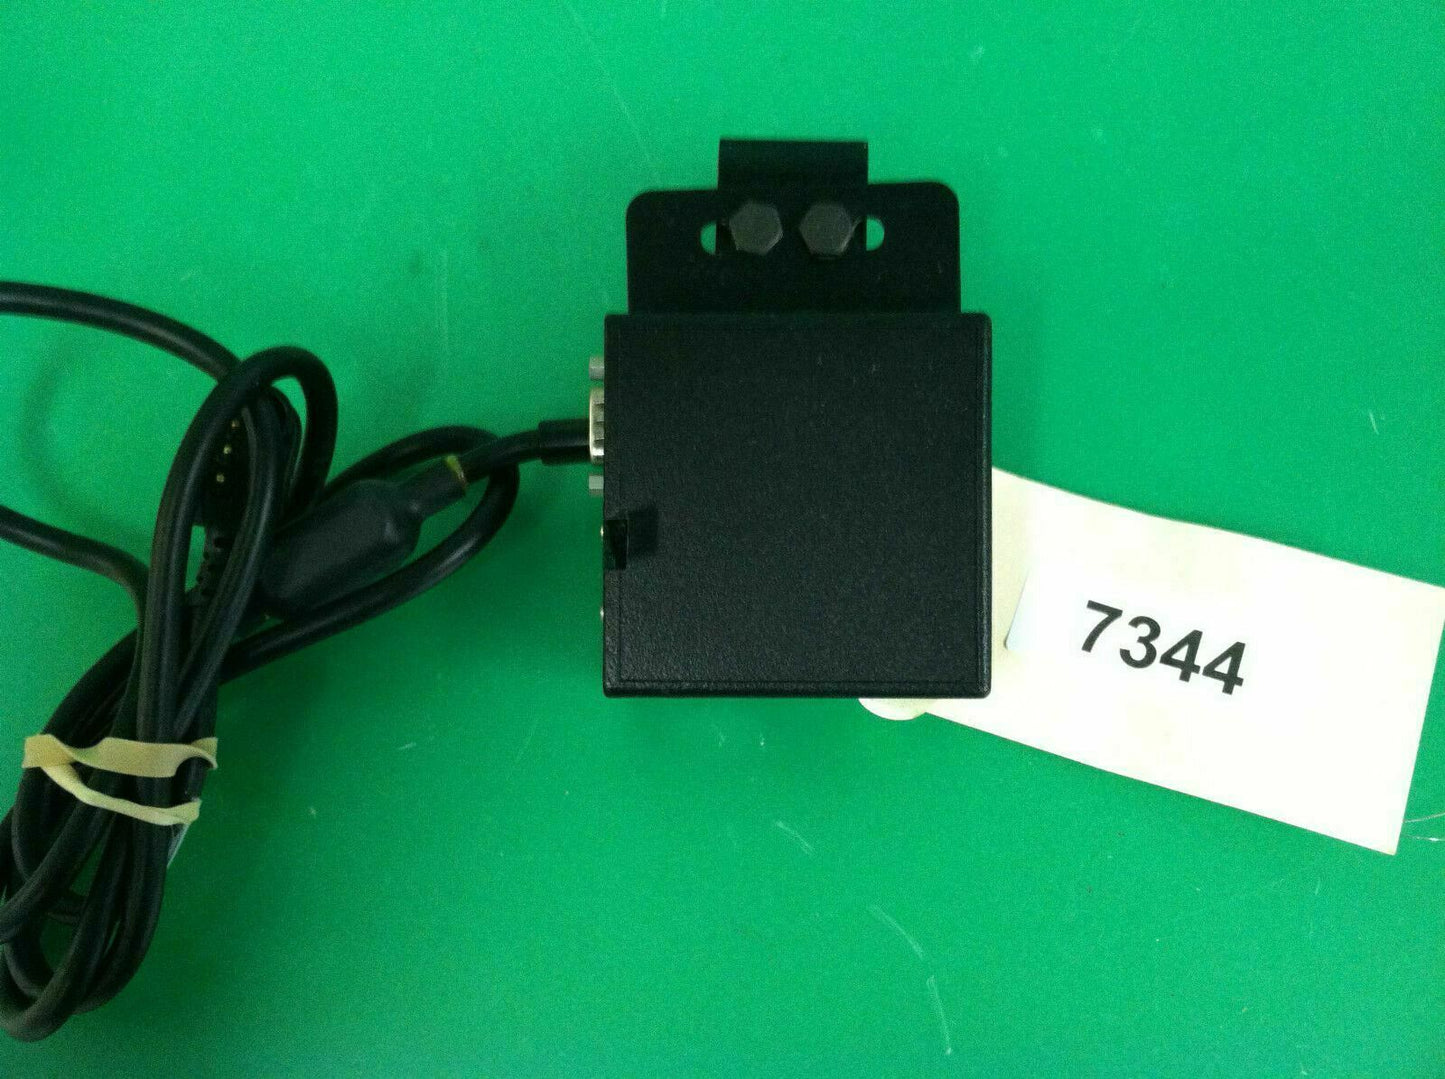 MK6 Switch  Input Control Box Model 1136903 for Power Wheelchair  #7344